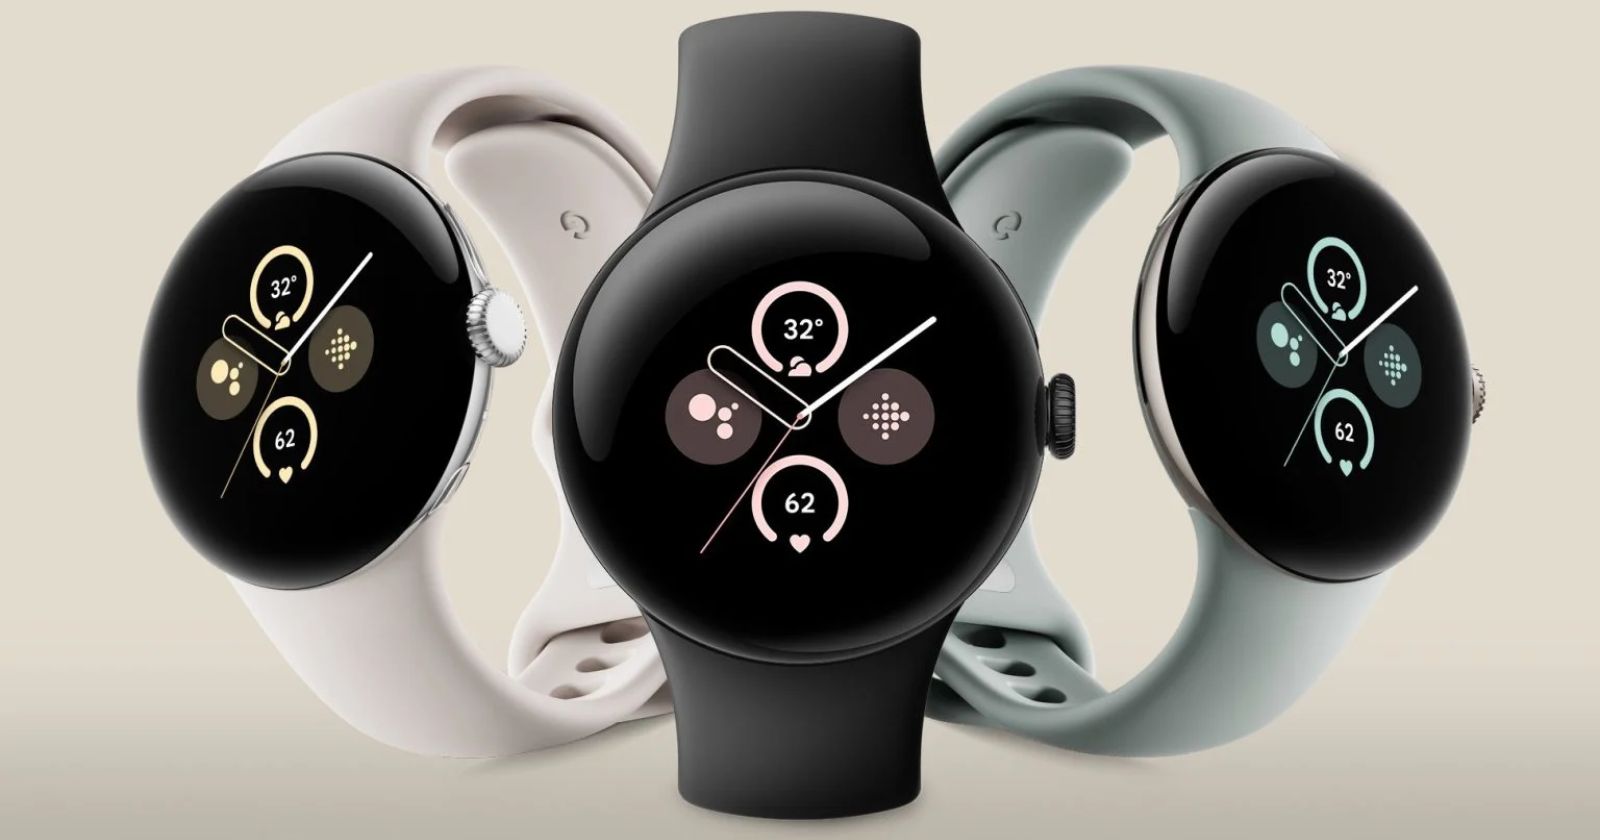 The price of Google Pixel Watch 2 has been revealed!